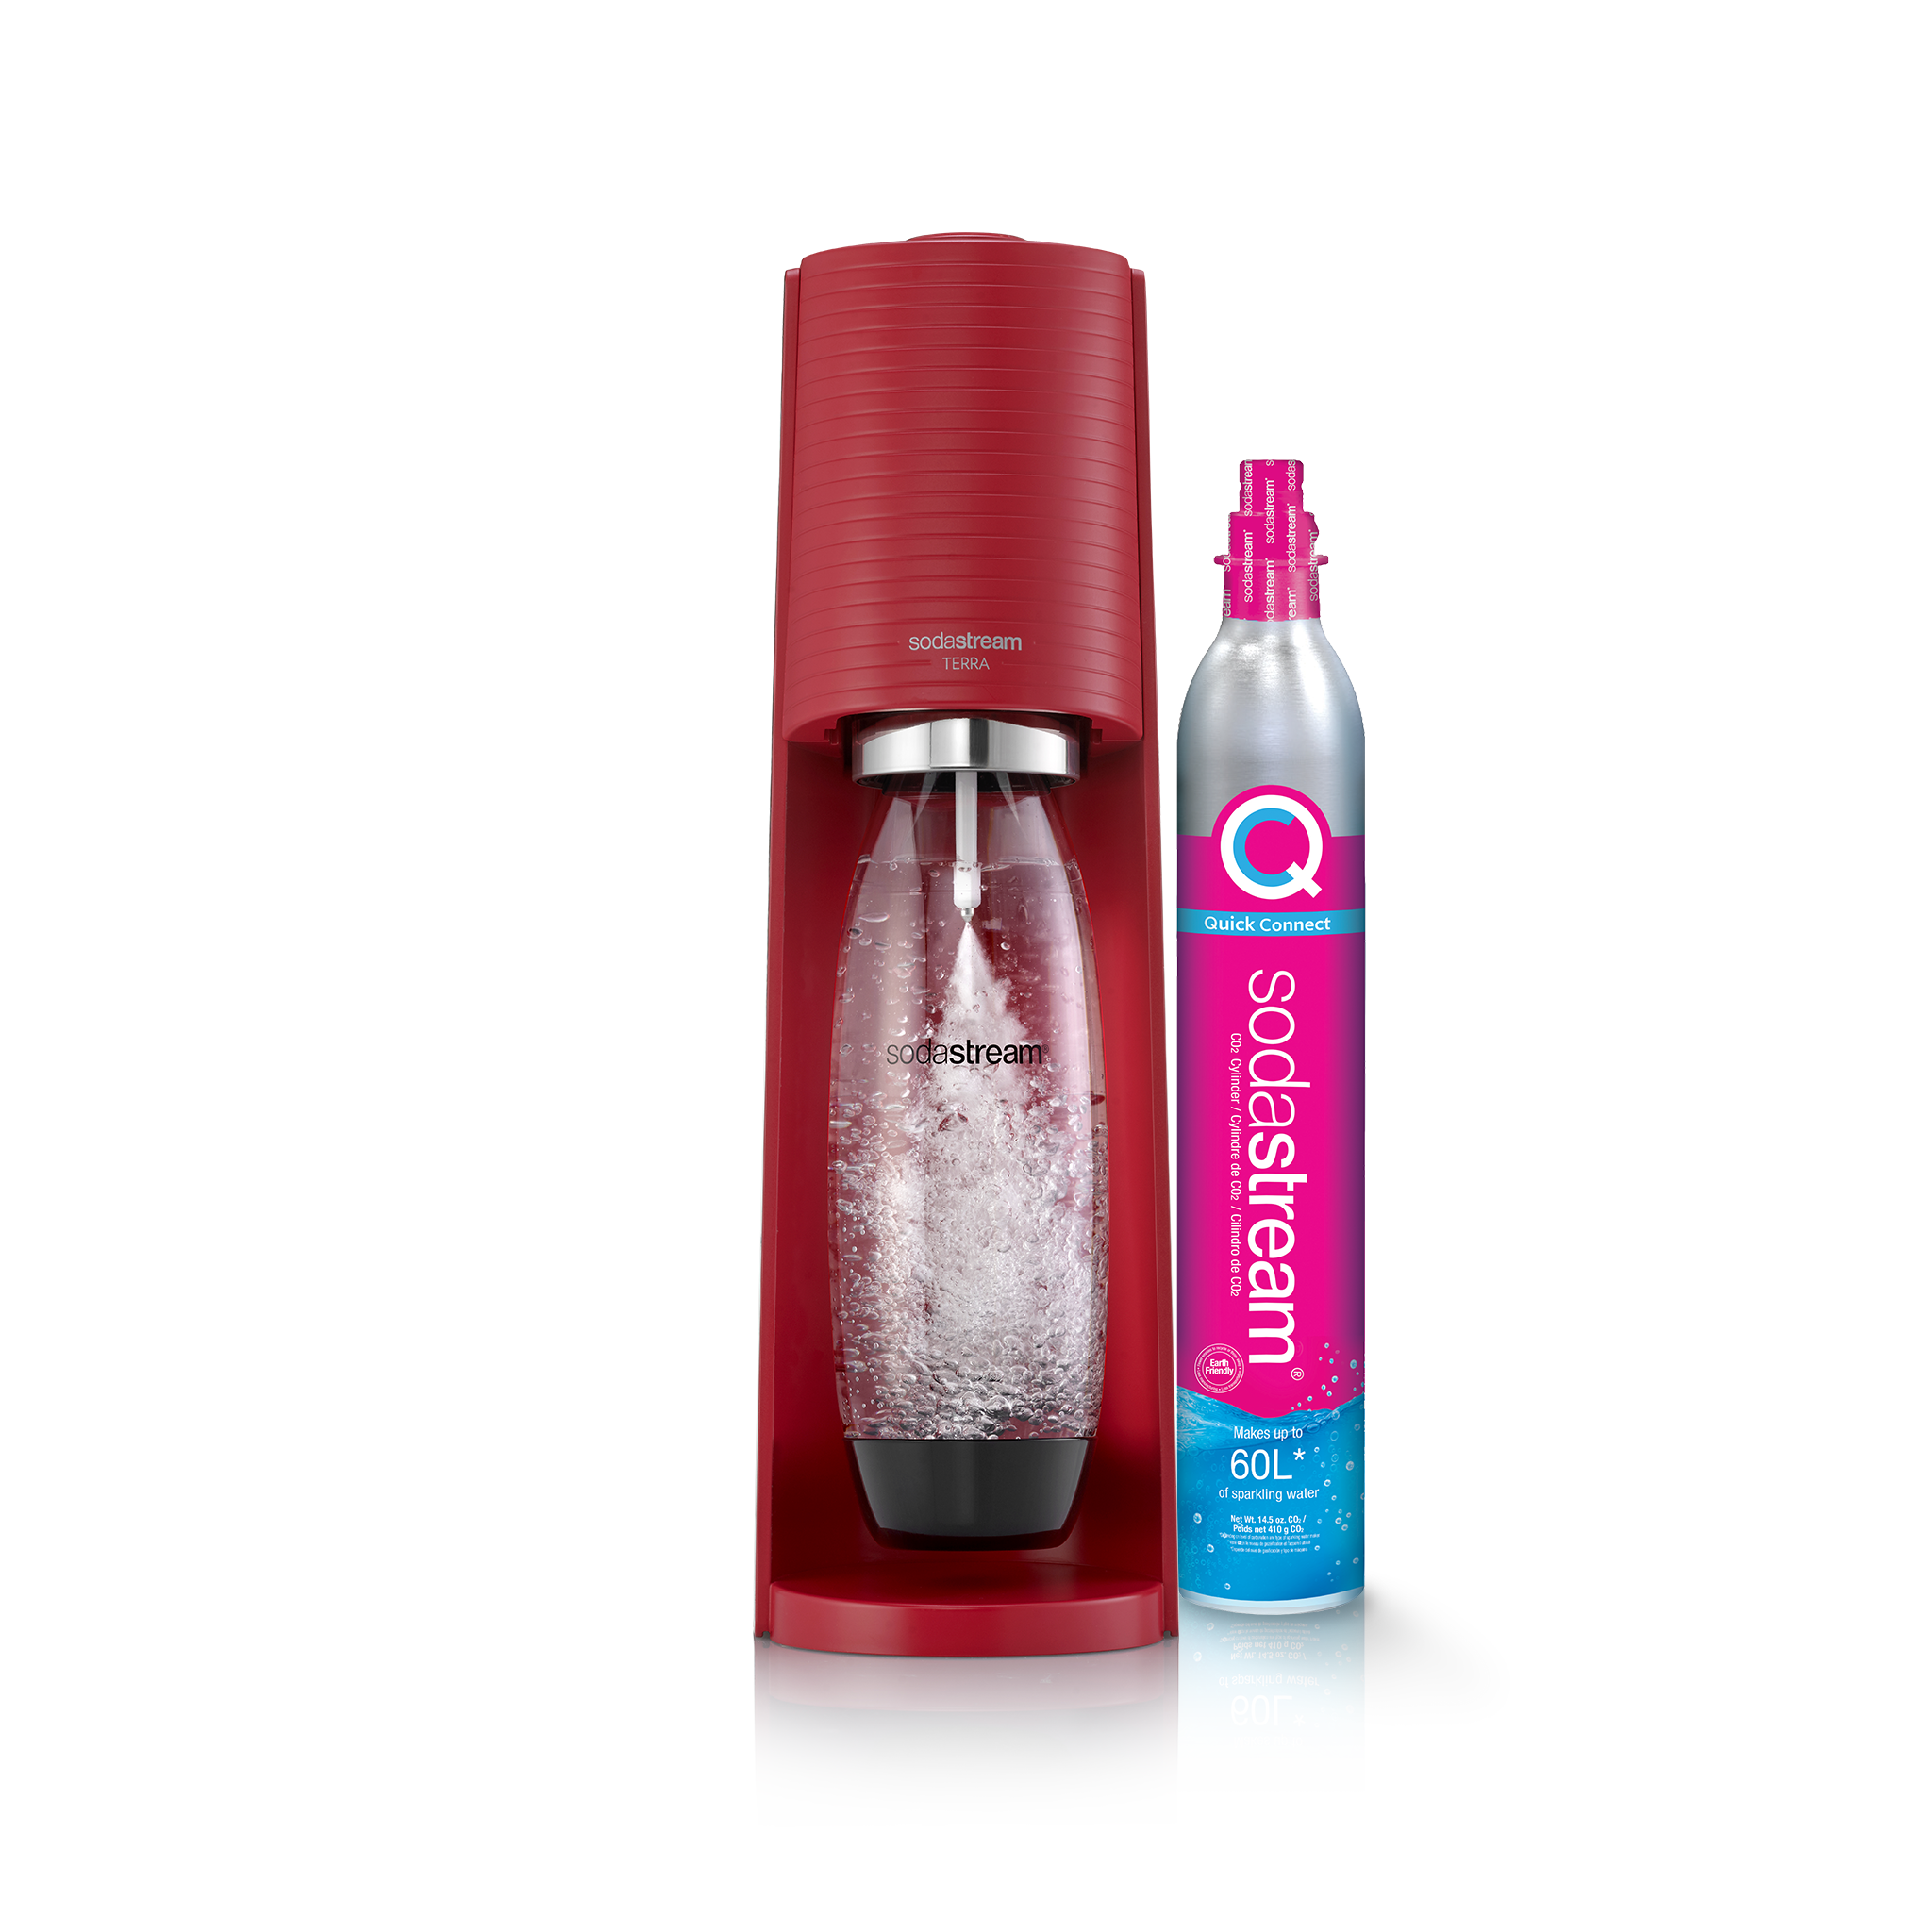 SodaStream Terra Red Soda Maker with Sparkling Water Function - Cordless  Design, Dishwasher Bottle, CO2 Cylinder Included in the Flavored Water &  Soda Makers department at